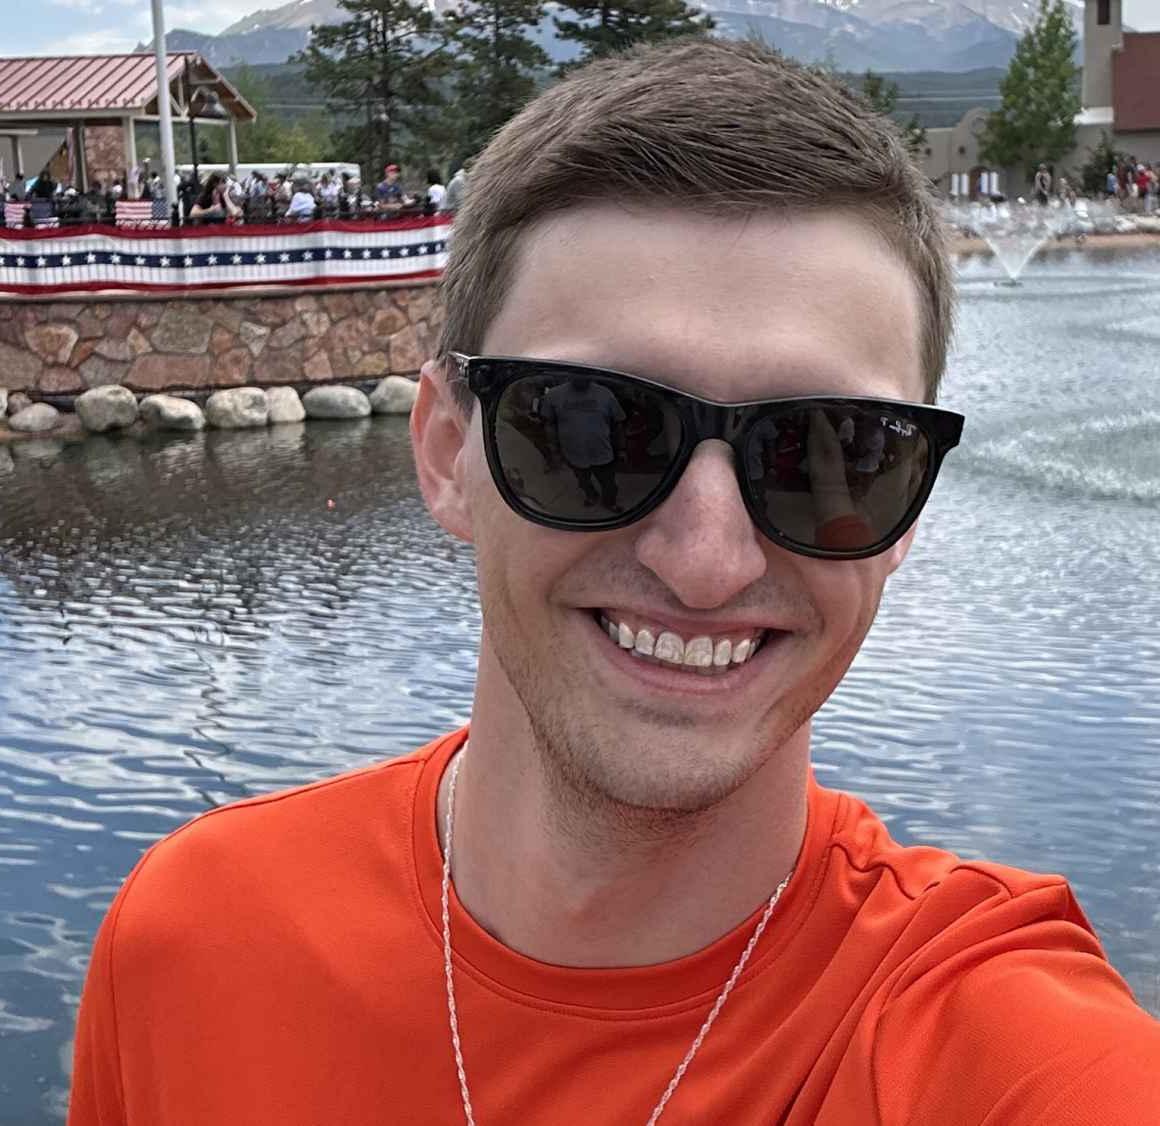 Selfie photo of Logan Ruths, smiling, wearing sunglasses in front of a pond with a flag pole on the other side of the water